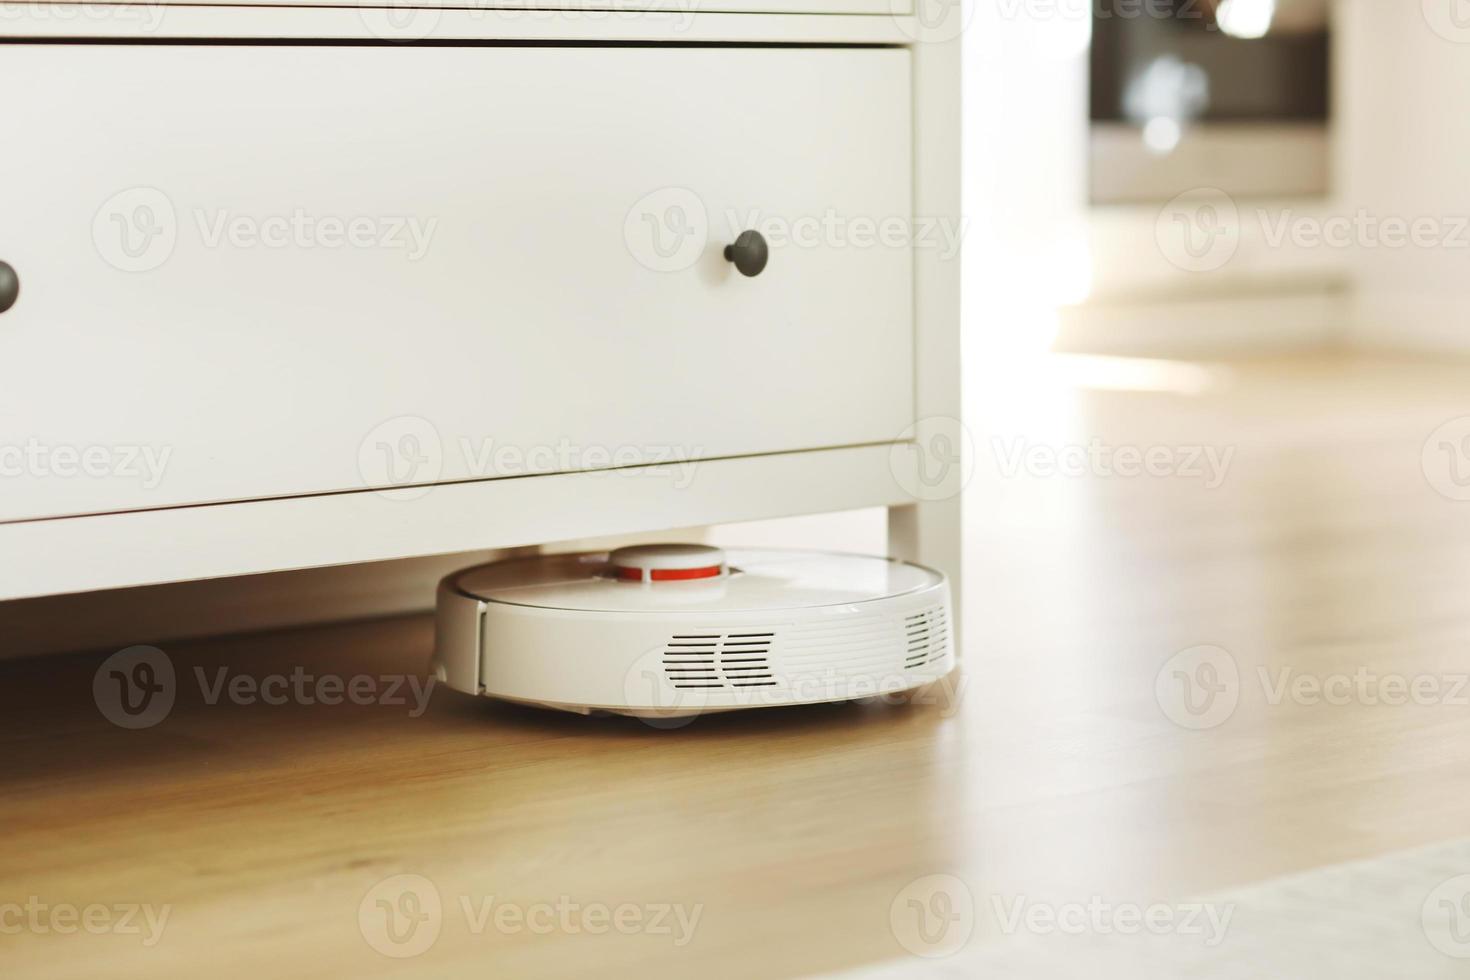 White robotic vacuum cleaner on laminate floor cleaning dust in living room interior. Smart electronic housekeeping technology. smart home photo